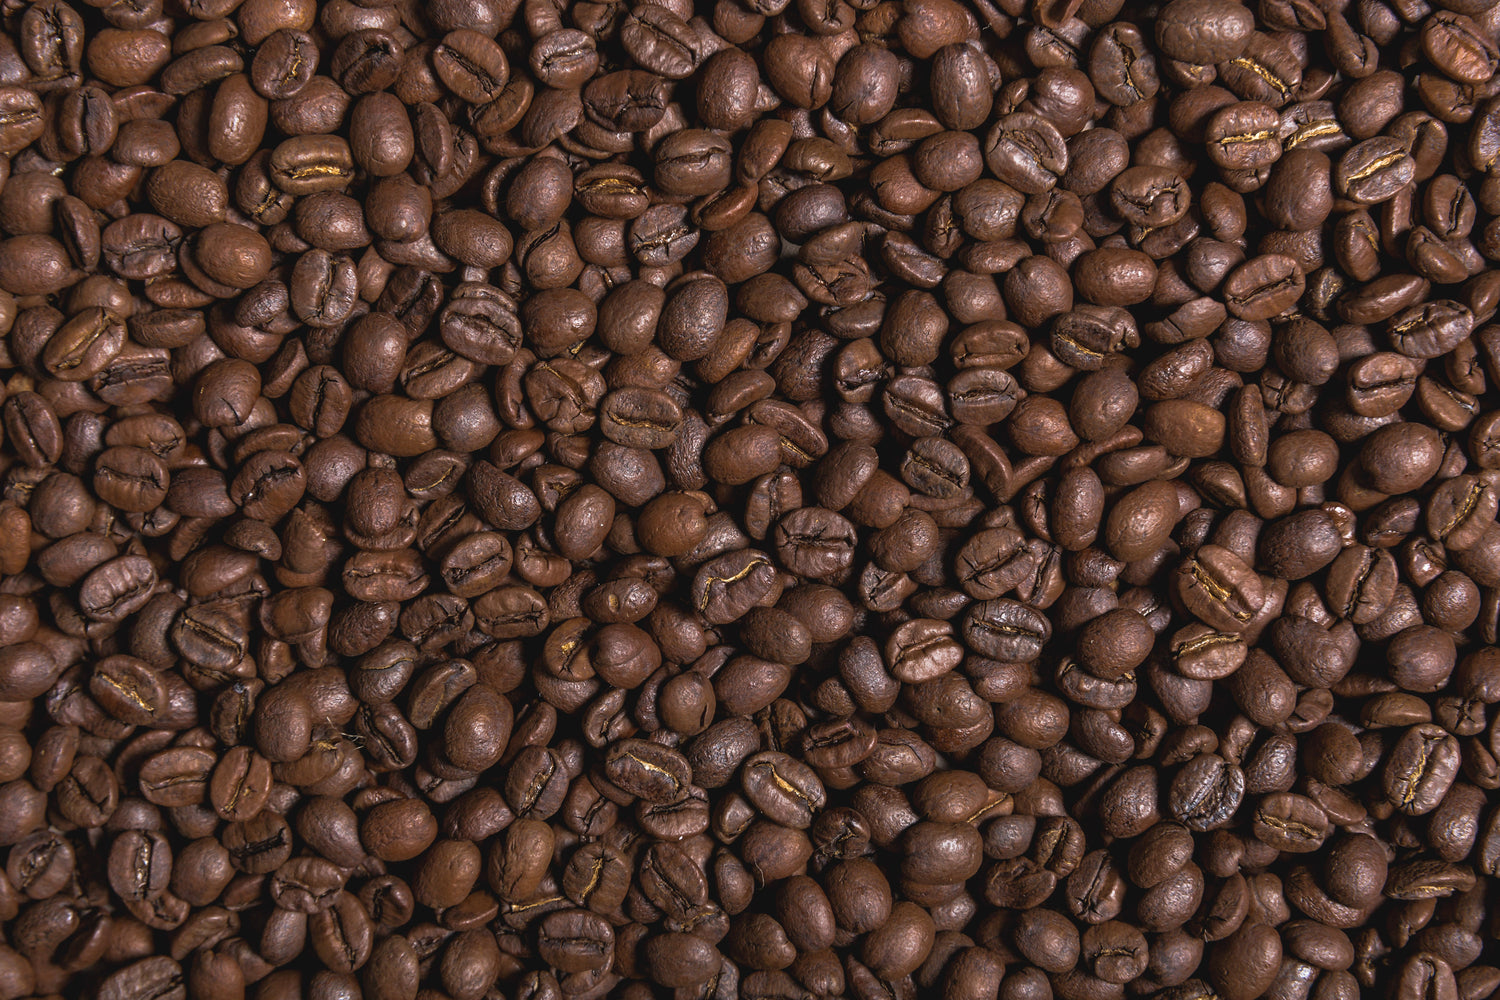 Our Whole Bean Coffees